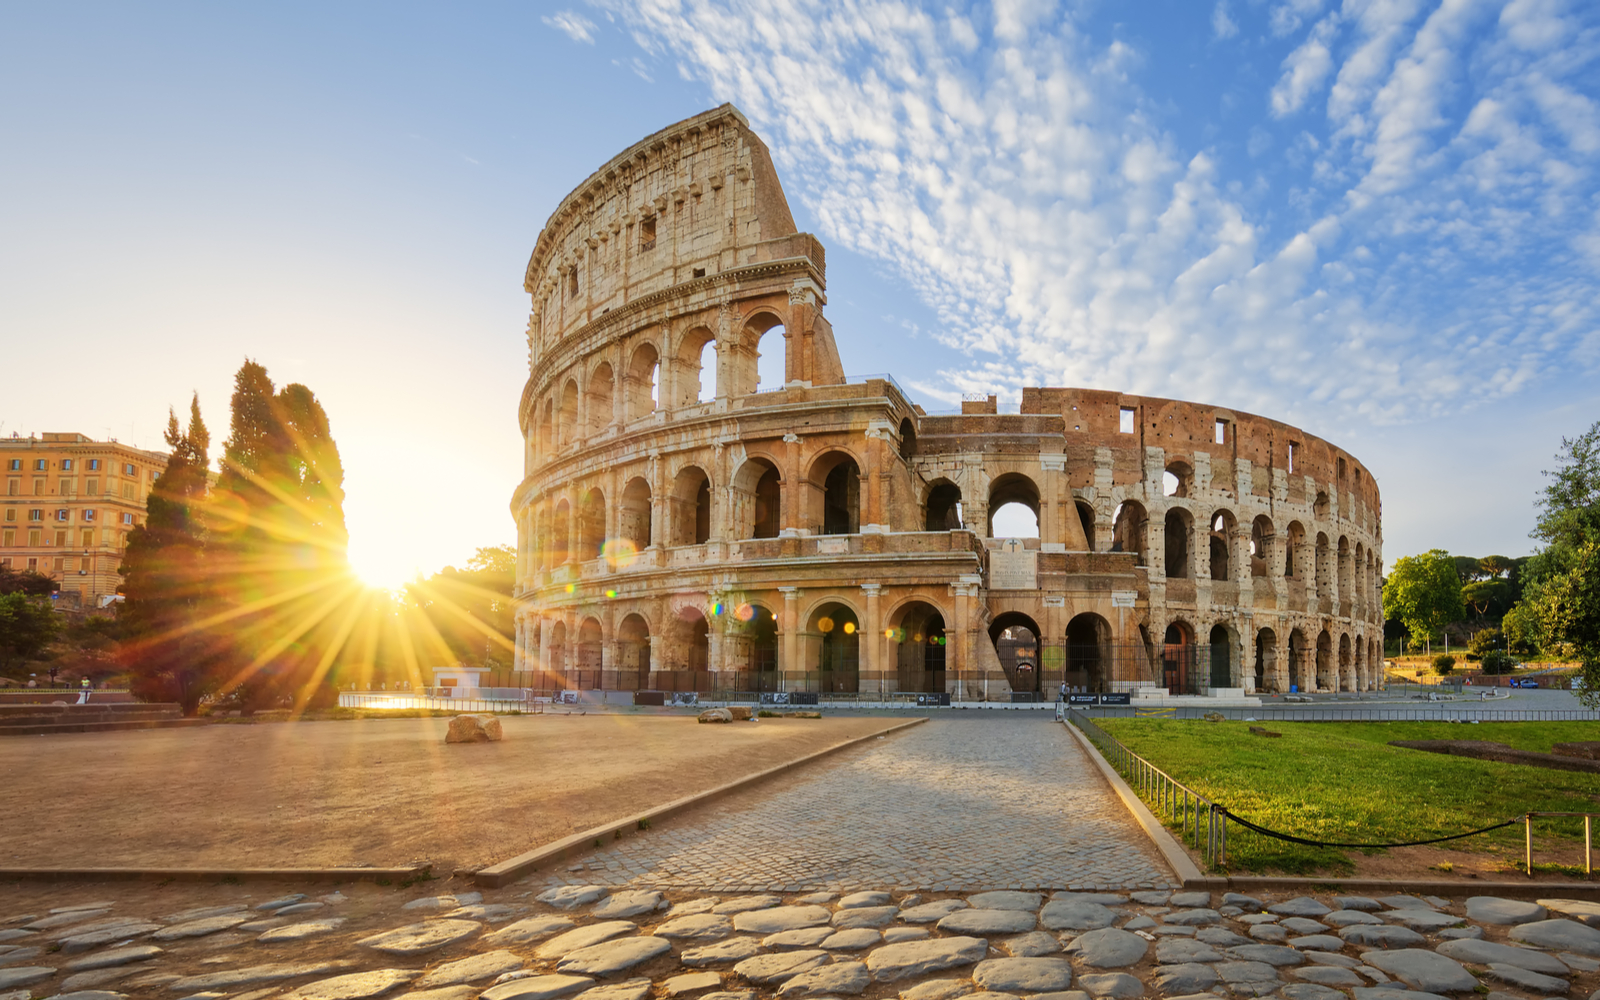 Colosseum in Rome pictured during the Spring or Summer, the overall best time to visit Italy